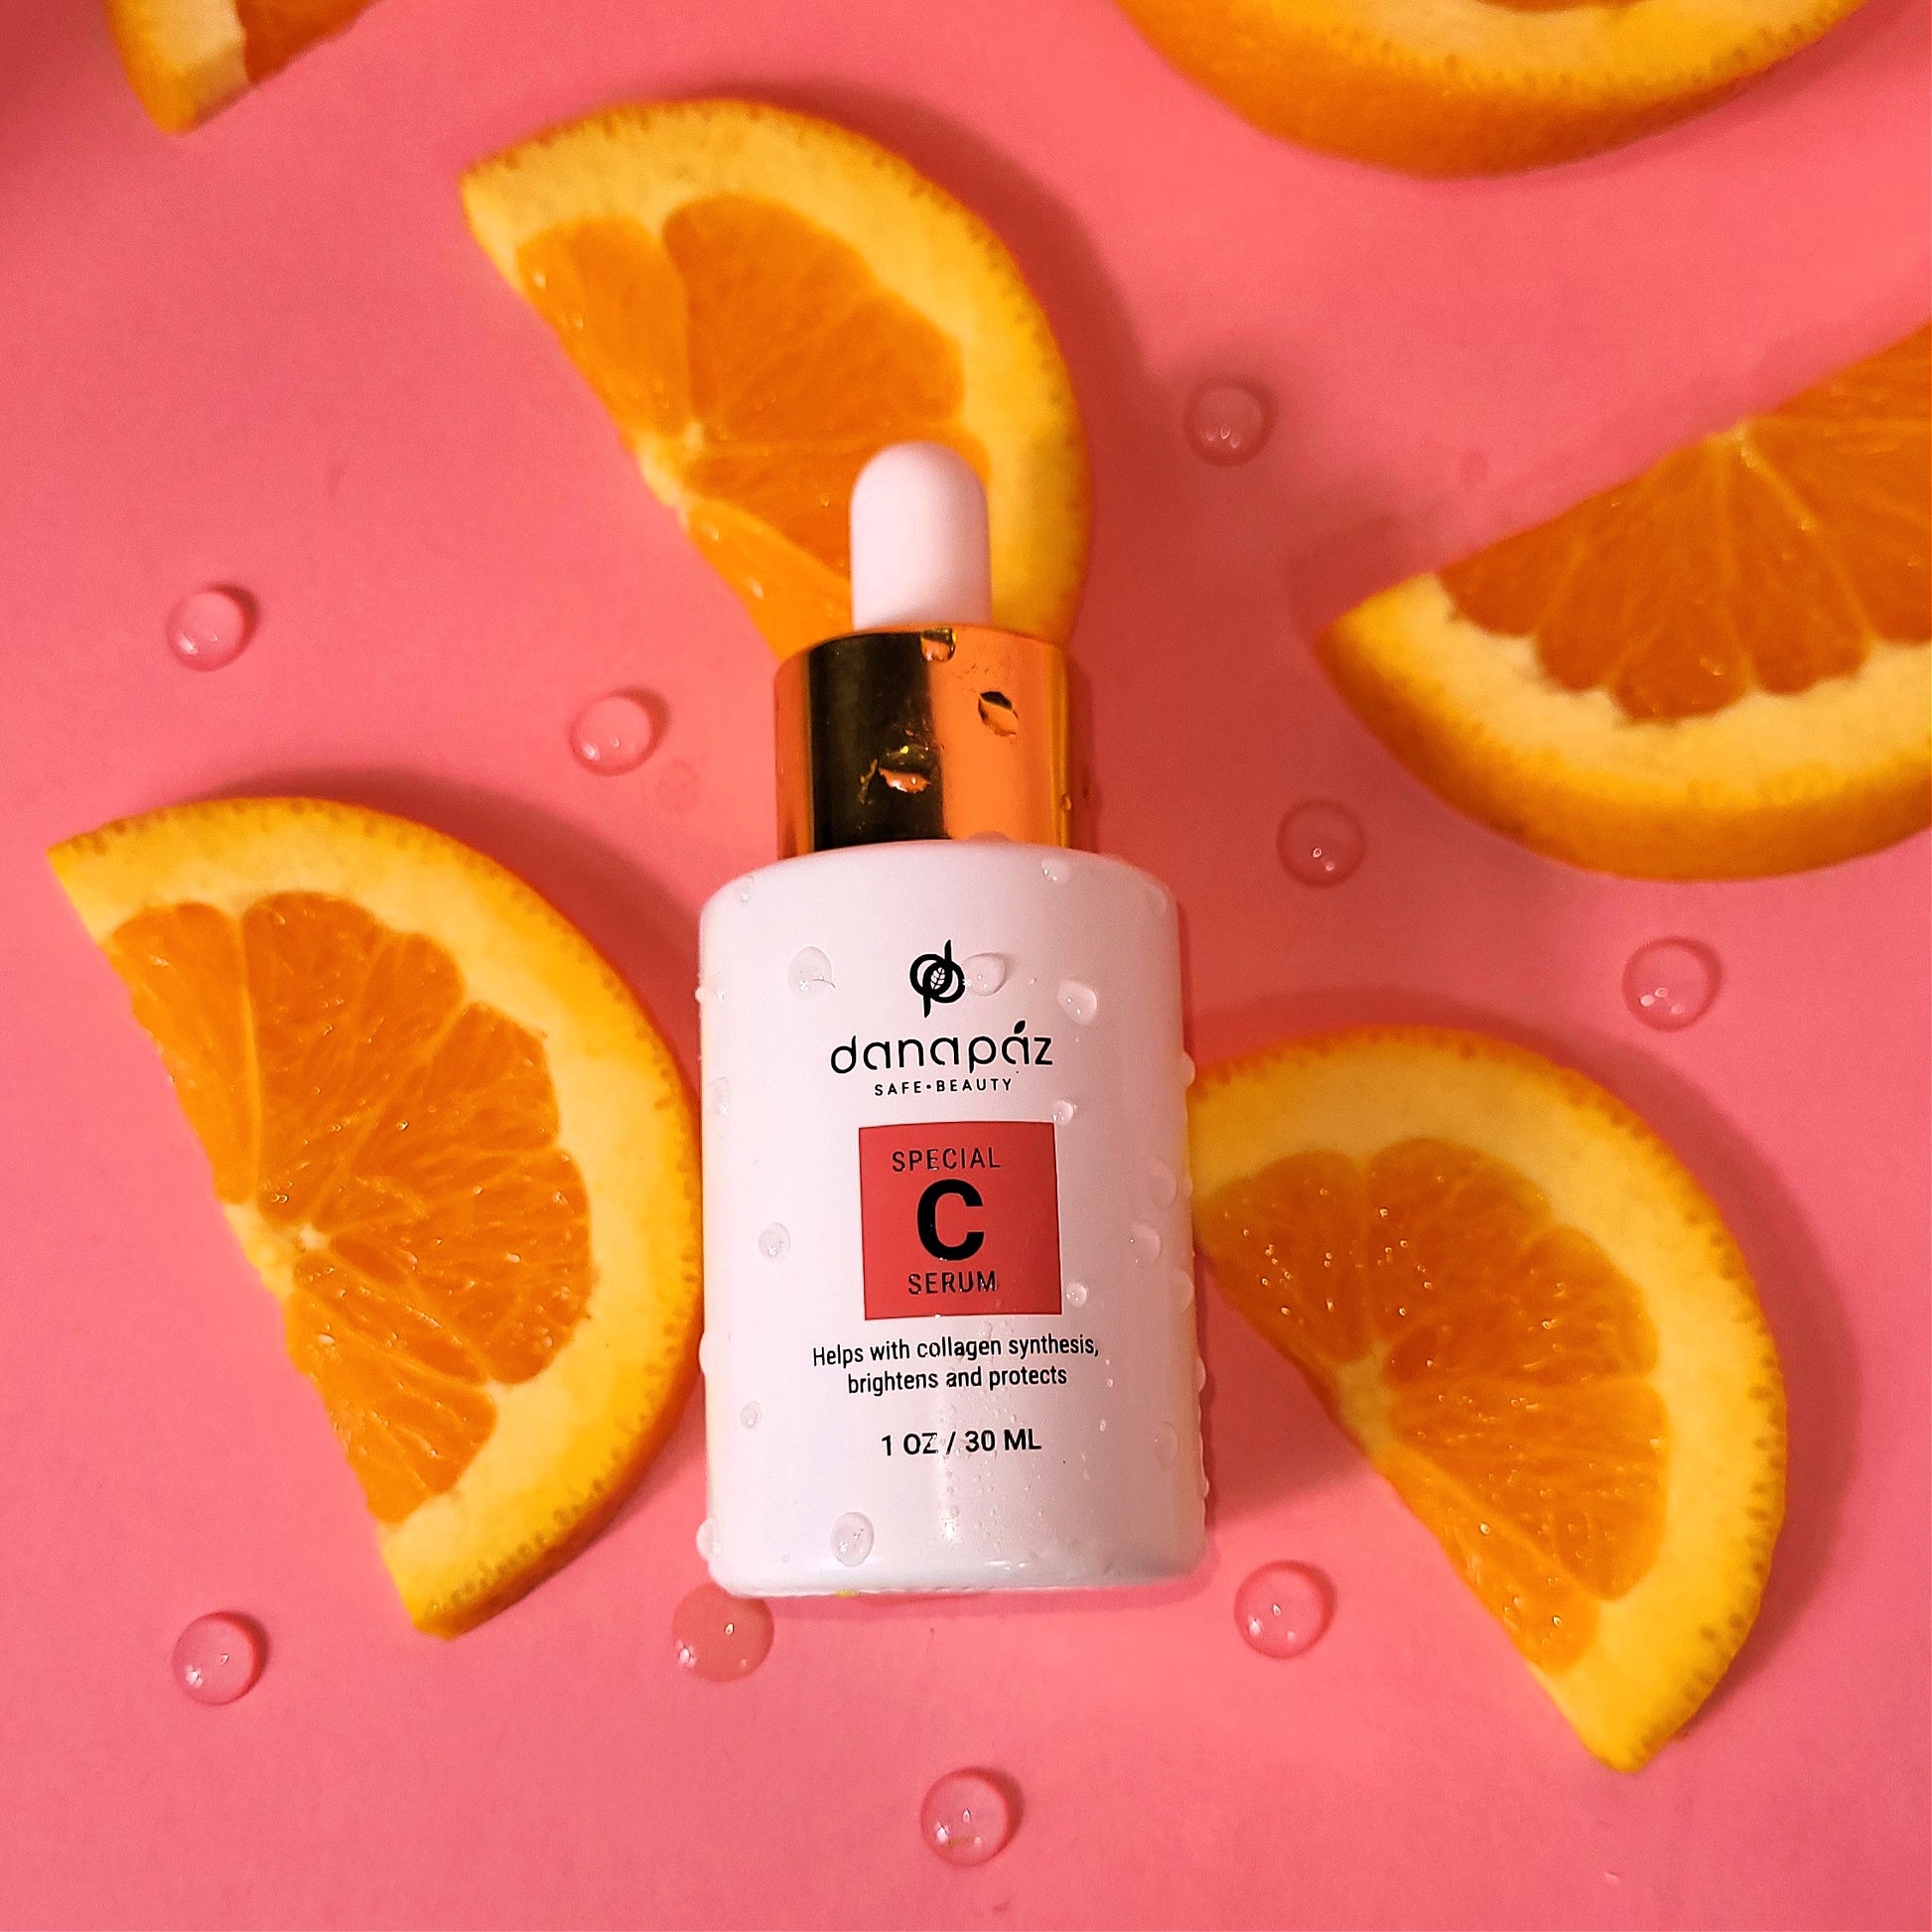 vitamin c serum for skin protection, antioxidant effect. It helps with hormonal imbalances, skin challenges, and stretch marks. Danapaz is a clean botanical based skincare line designed to address sensitive skin